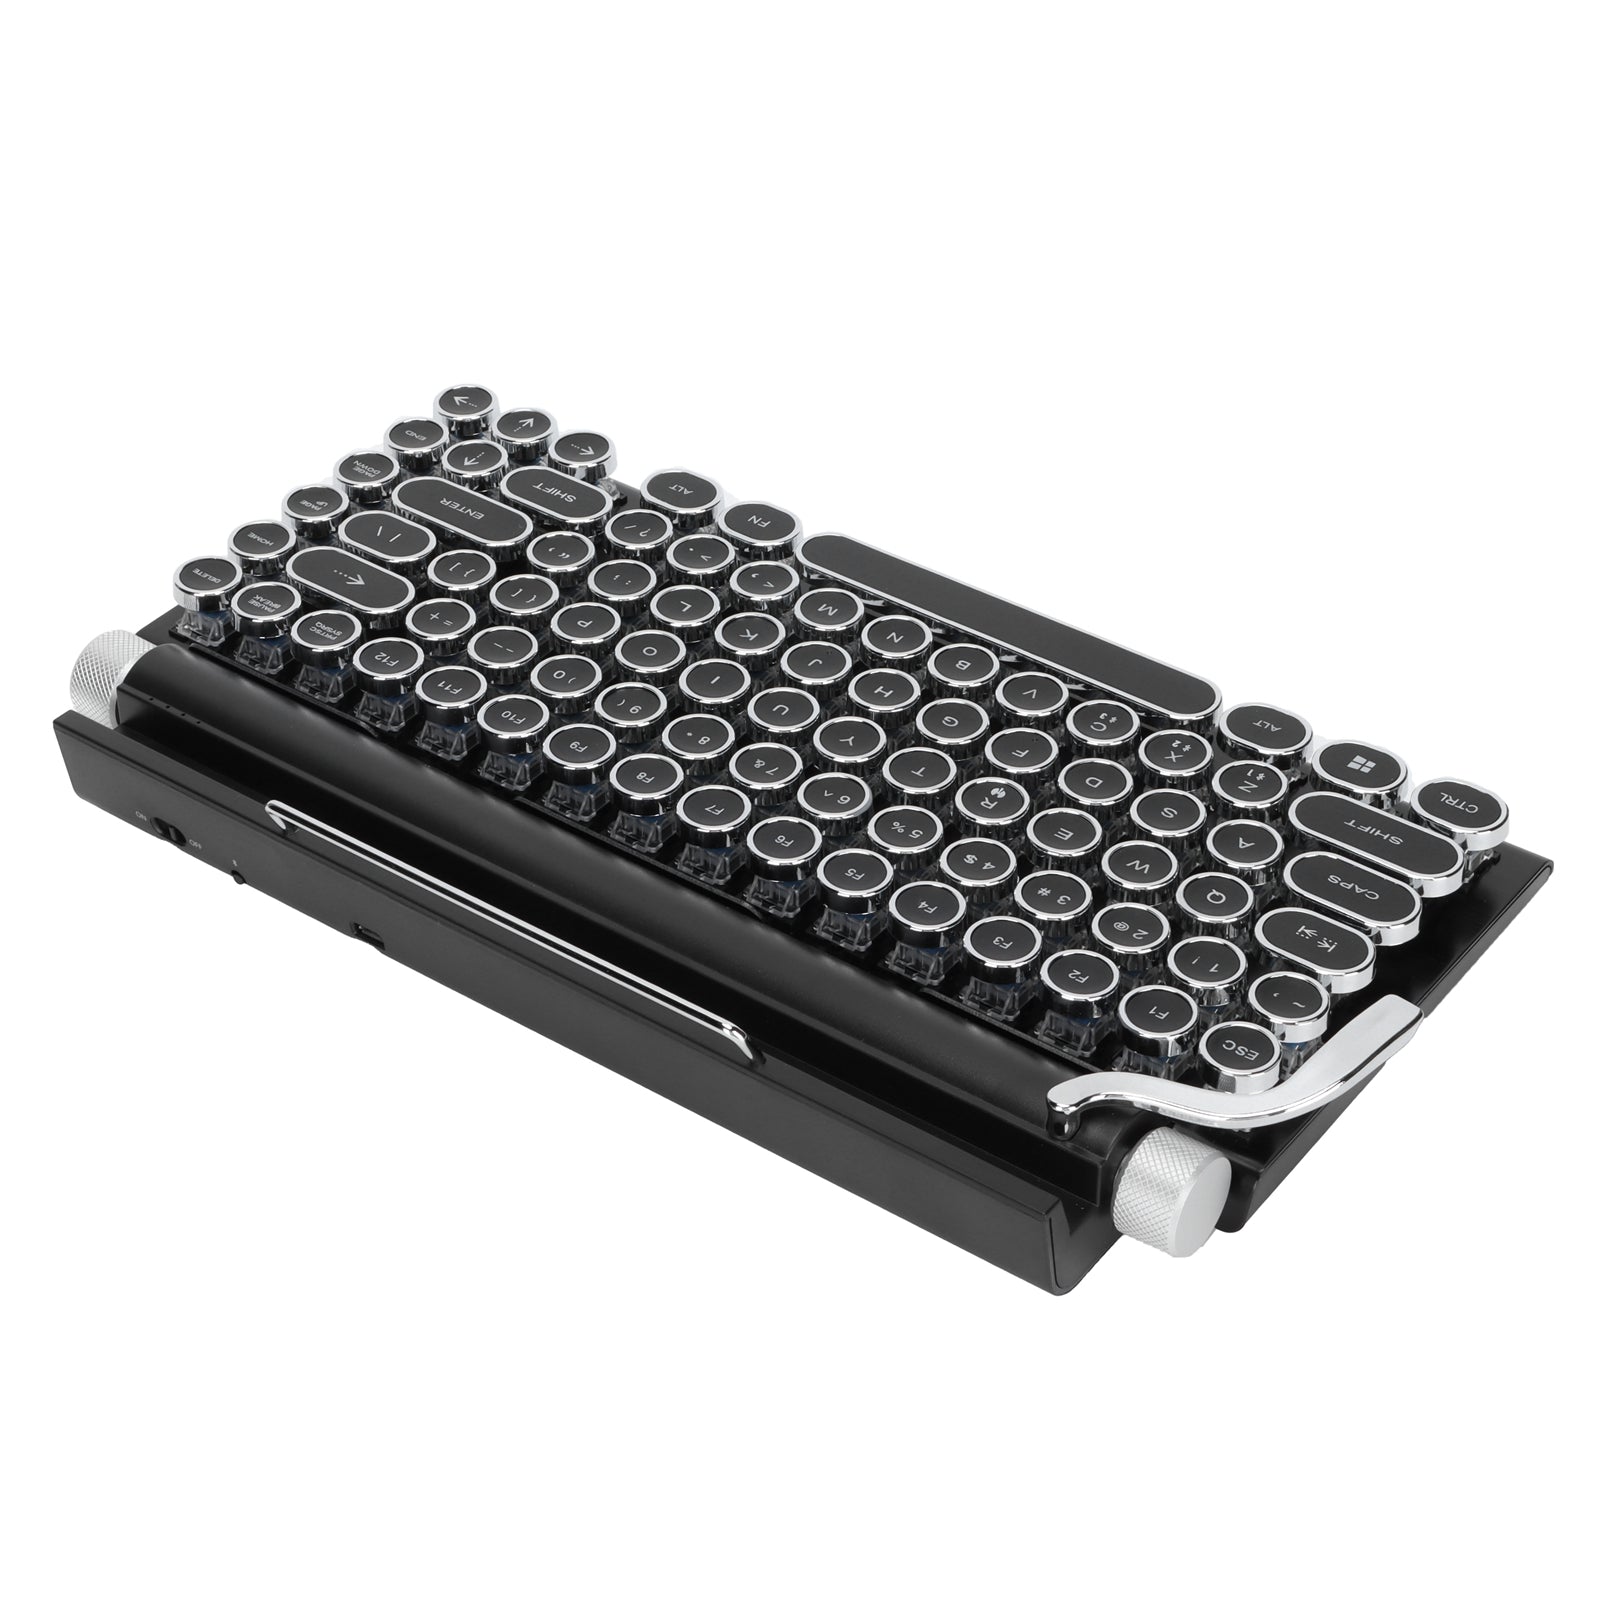 Retro Typewriter Keyboard with be easily accommodated by the integrated tablet holder